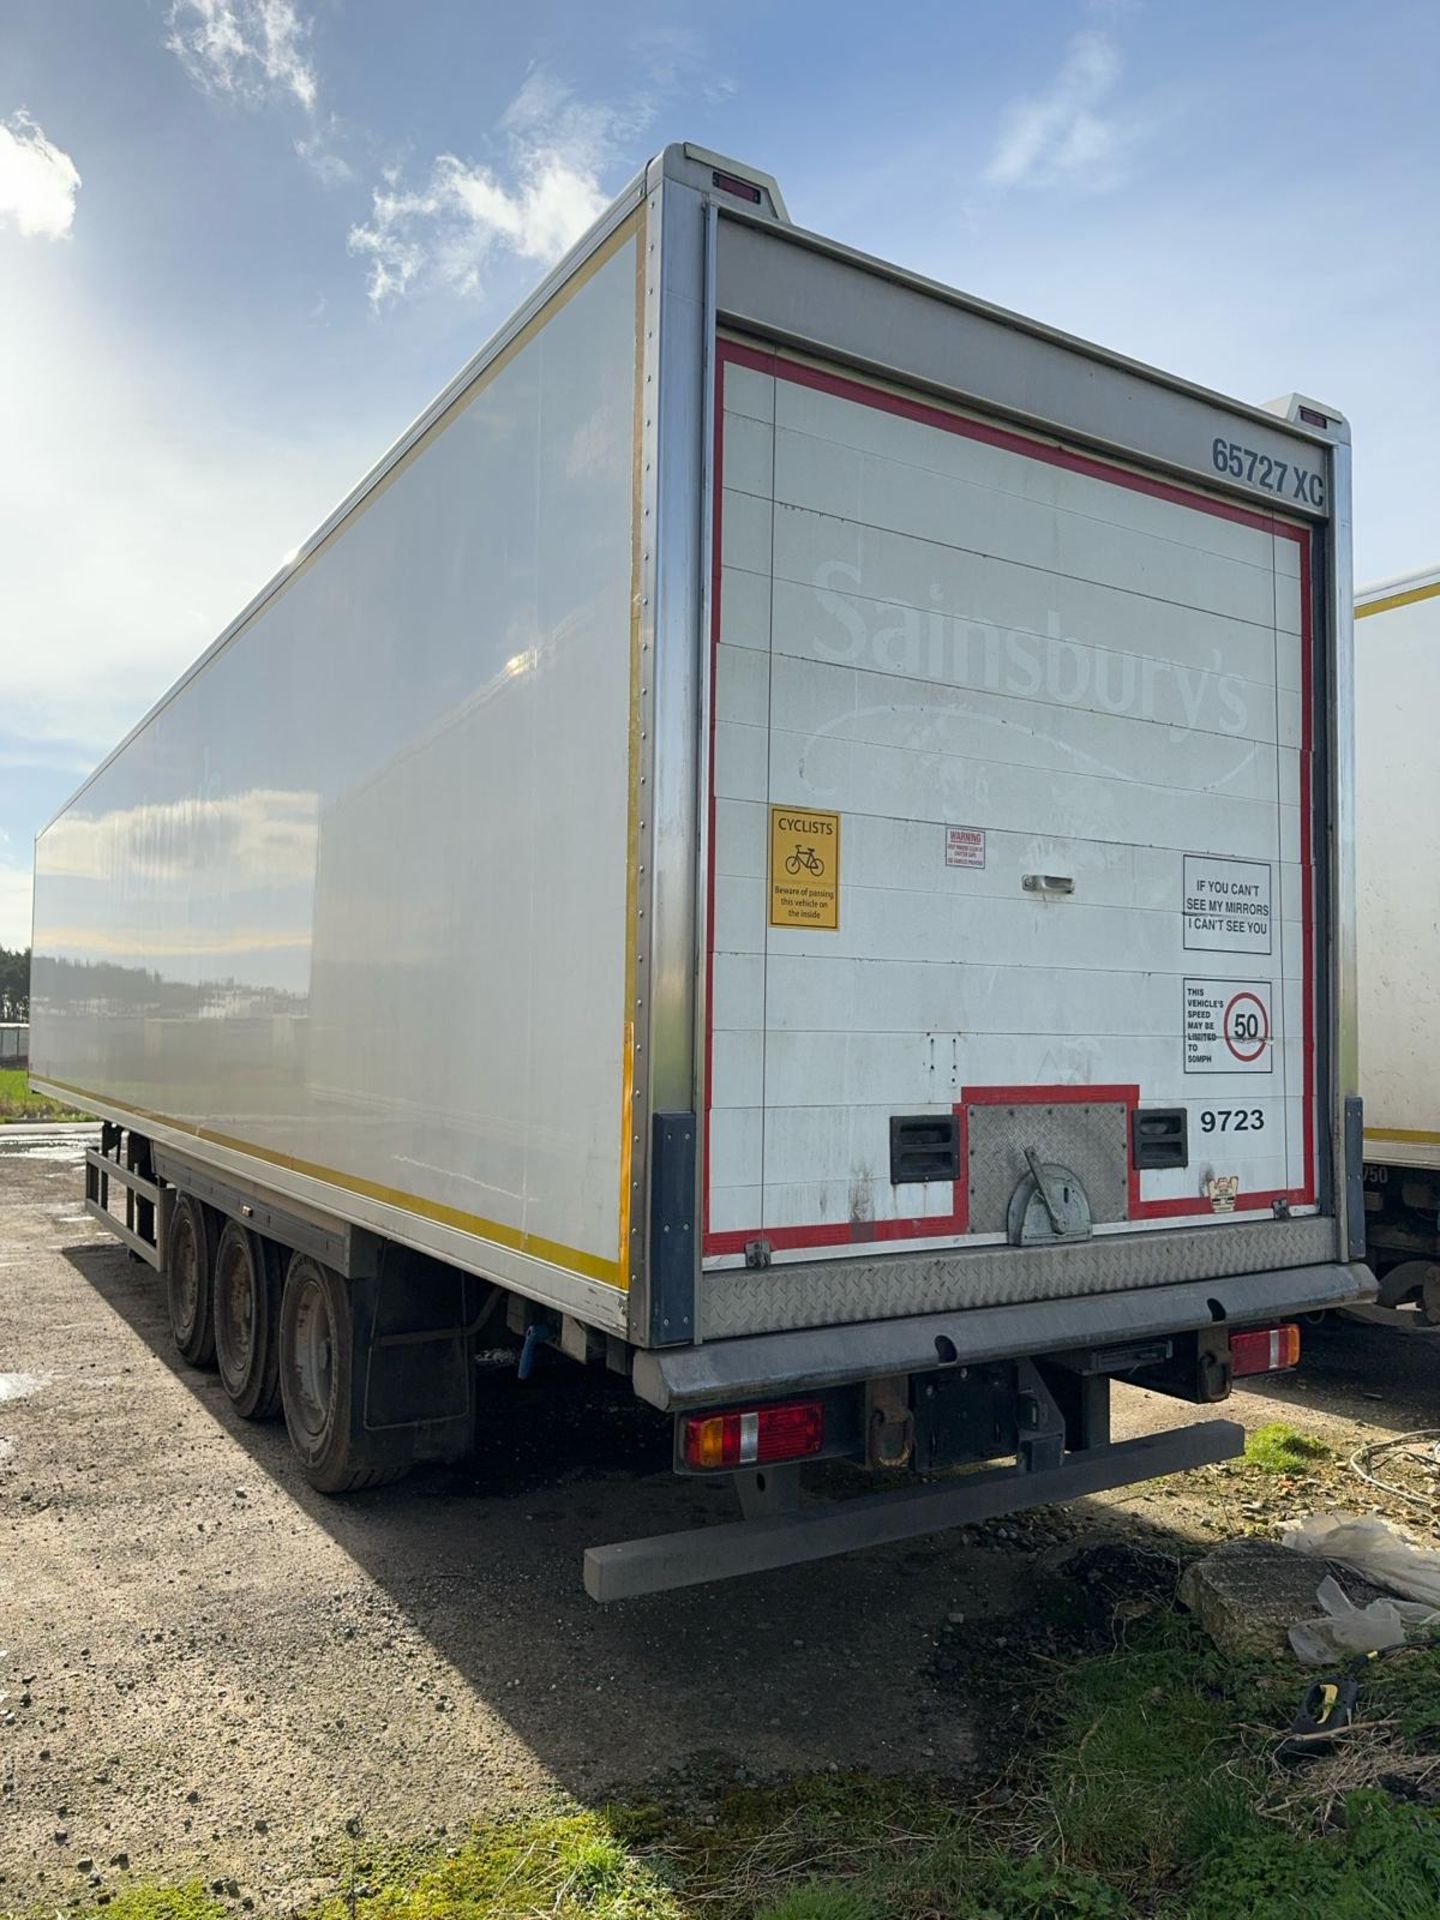 65727XC – 2015 Montracon 13.6m Refrigerated Trailer - Image 3 of 11